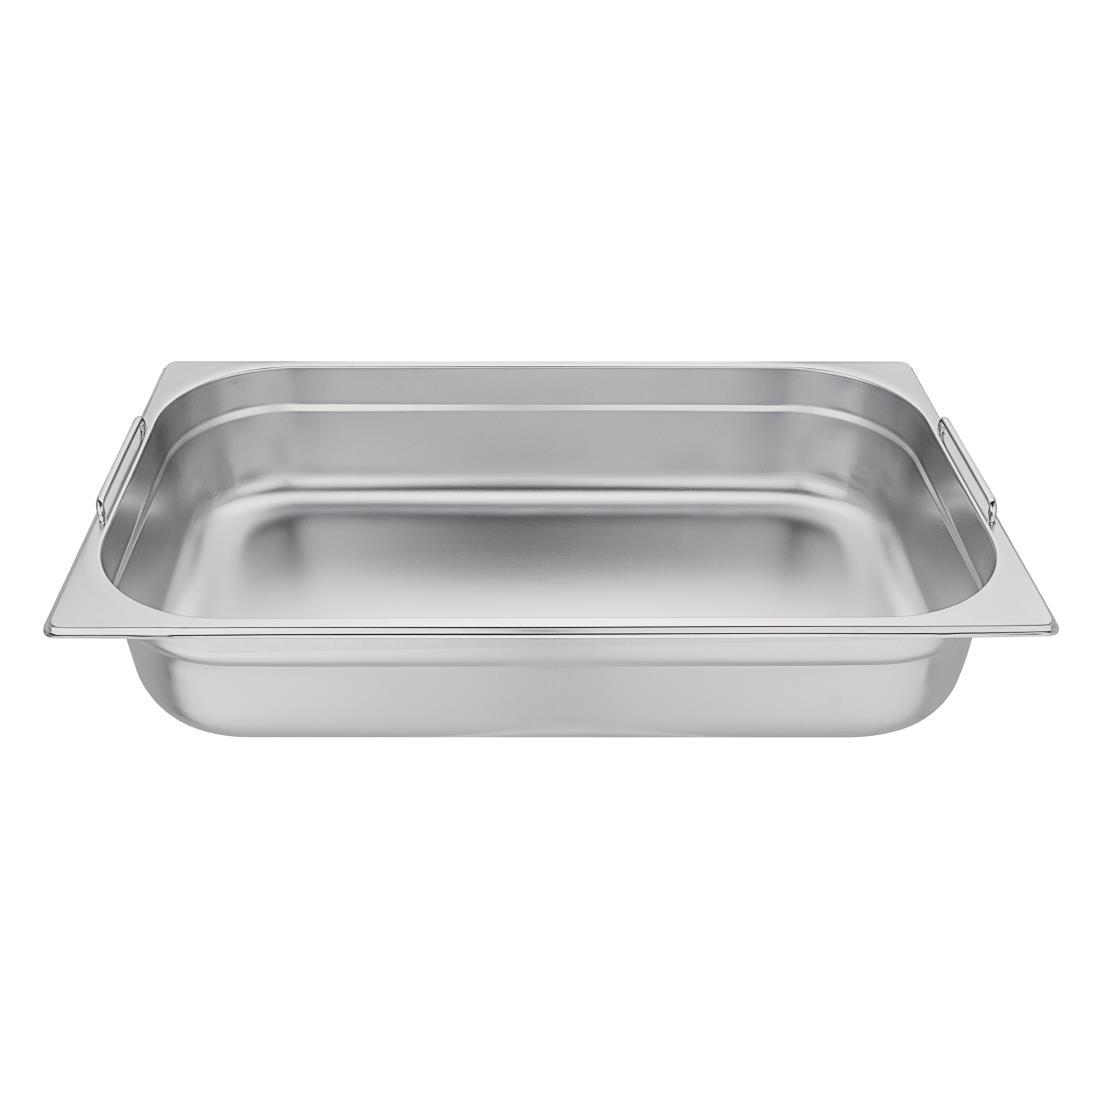 Vogue Stainless Steel 1/1 Gastronorm Pan With Handles 100mm - CB179  - 1